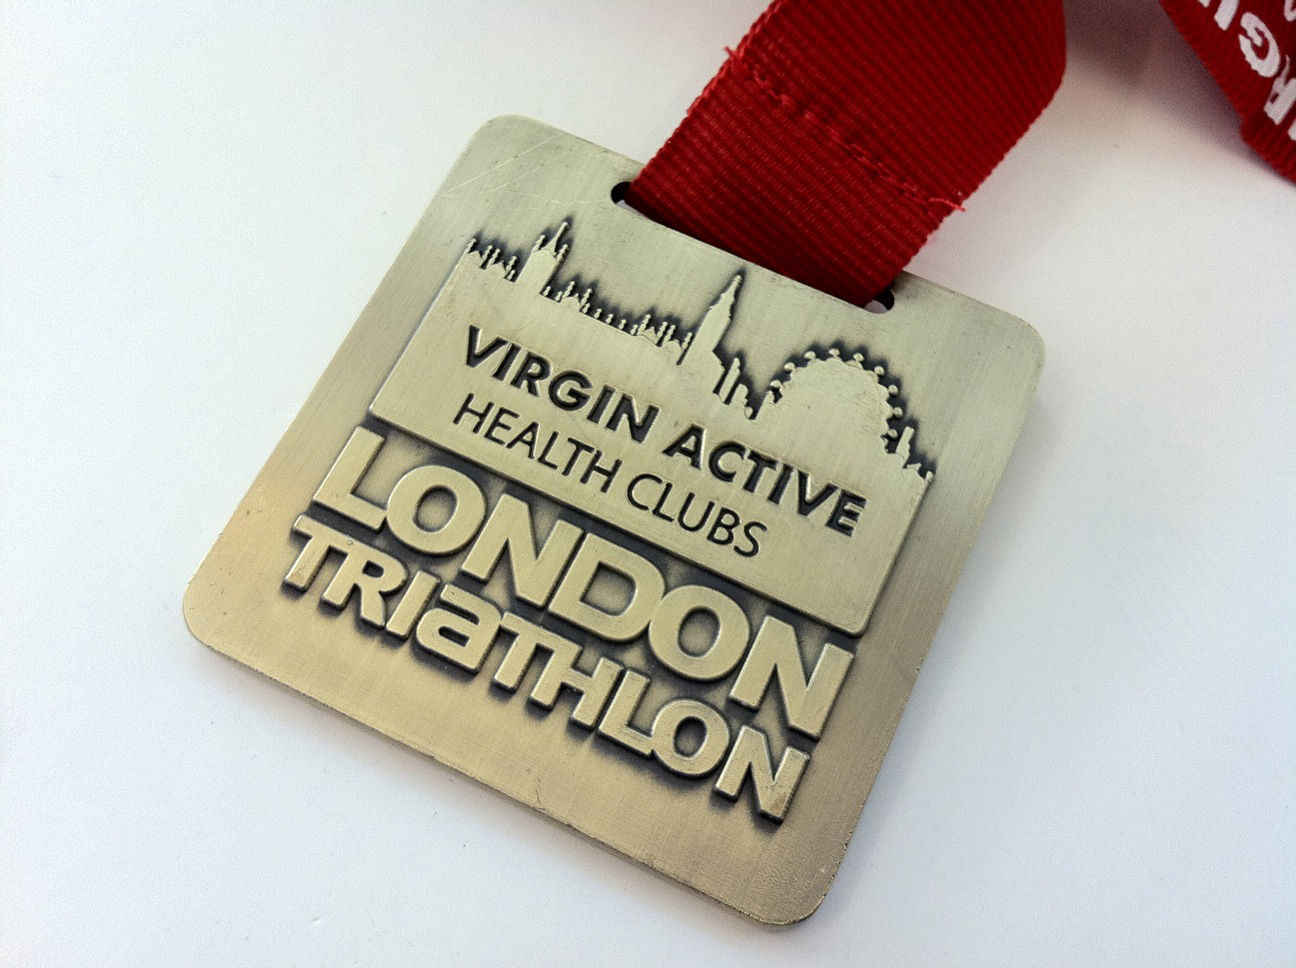 Promotional Medals